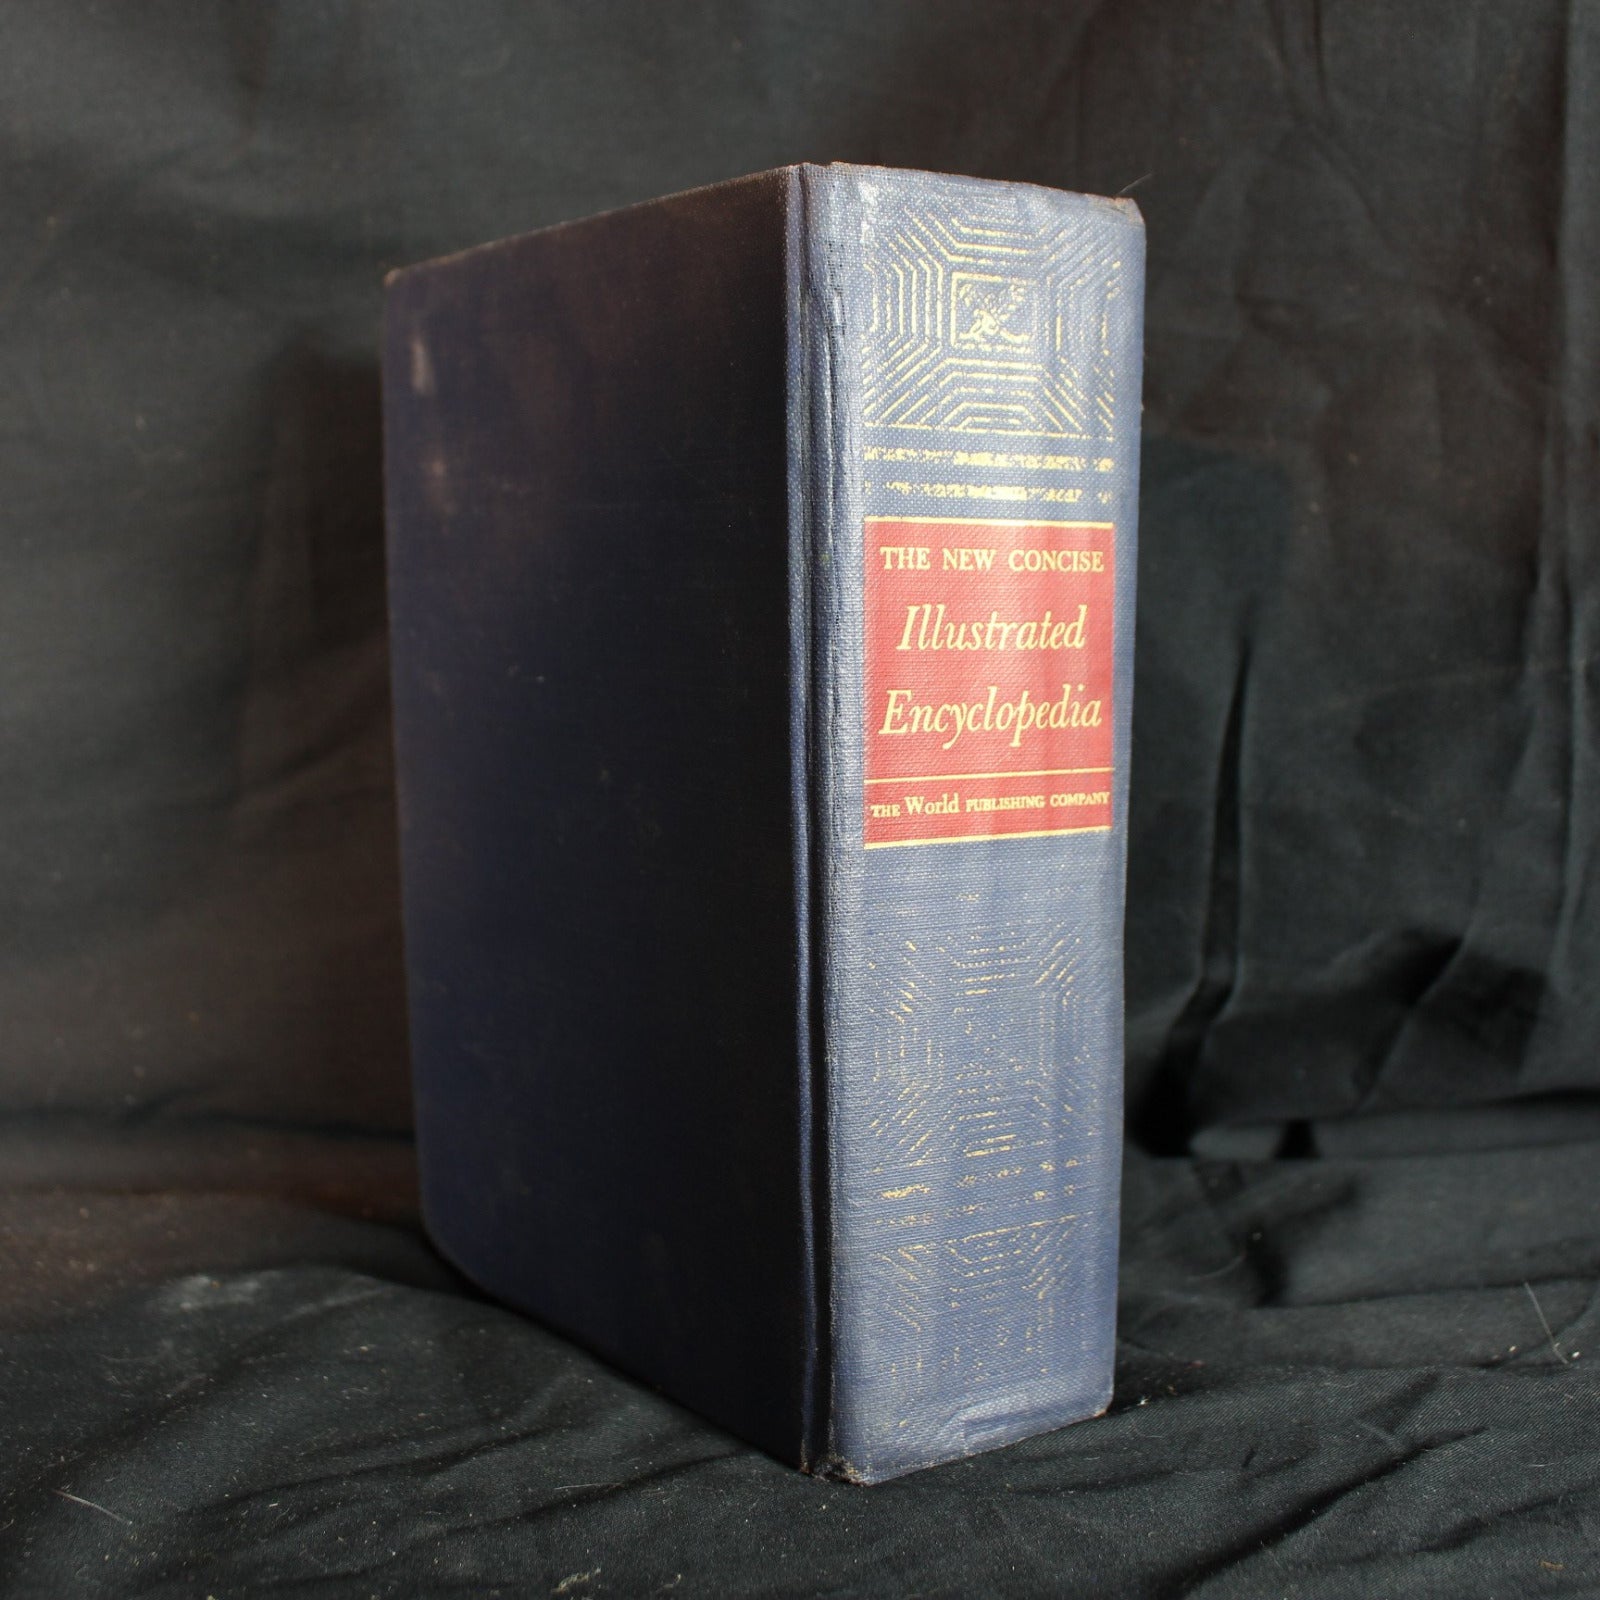 Hardcover New Concise Illustrated Encyclopedia by Nella Braddy, 1942